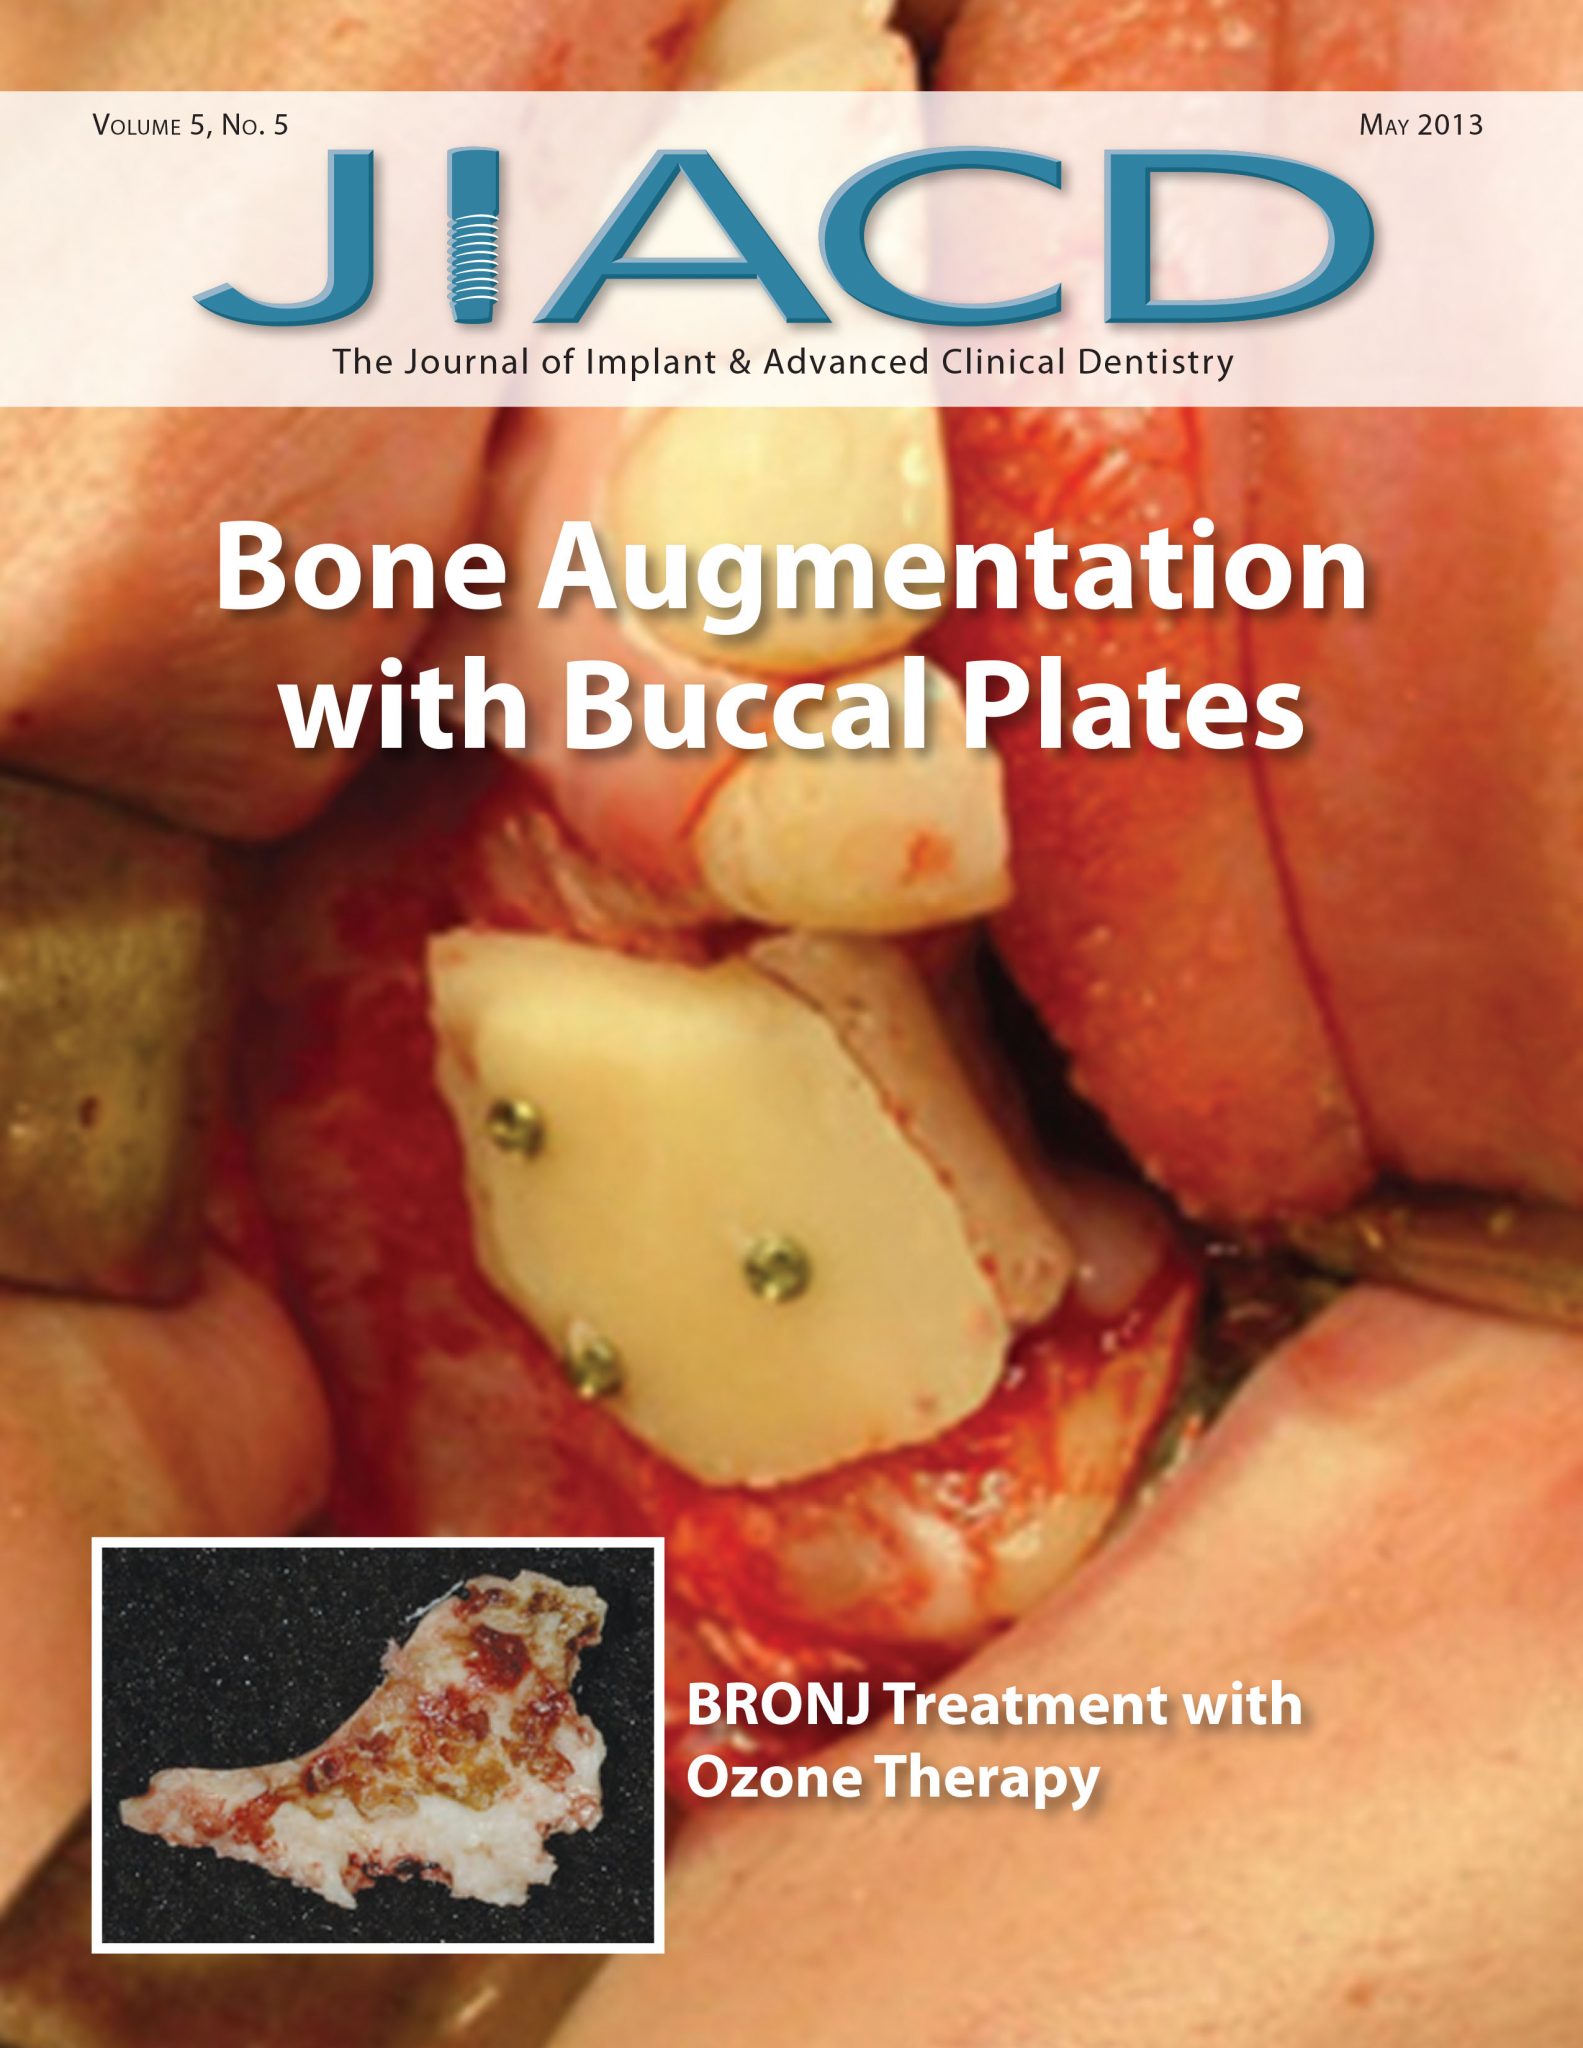 Bone Augmentation with Buccal Plates